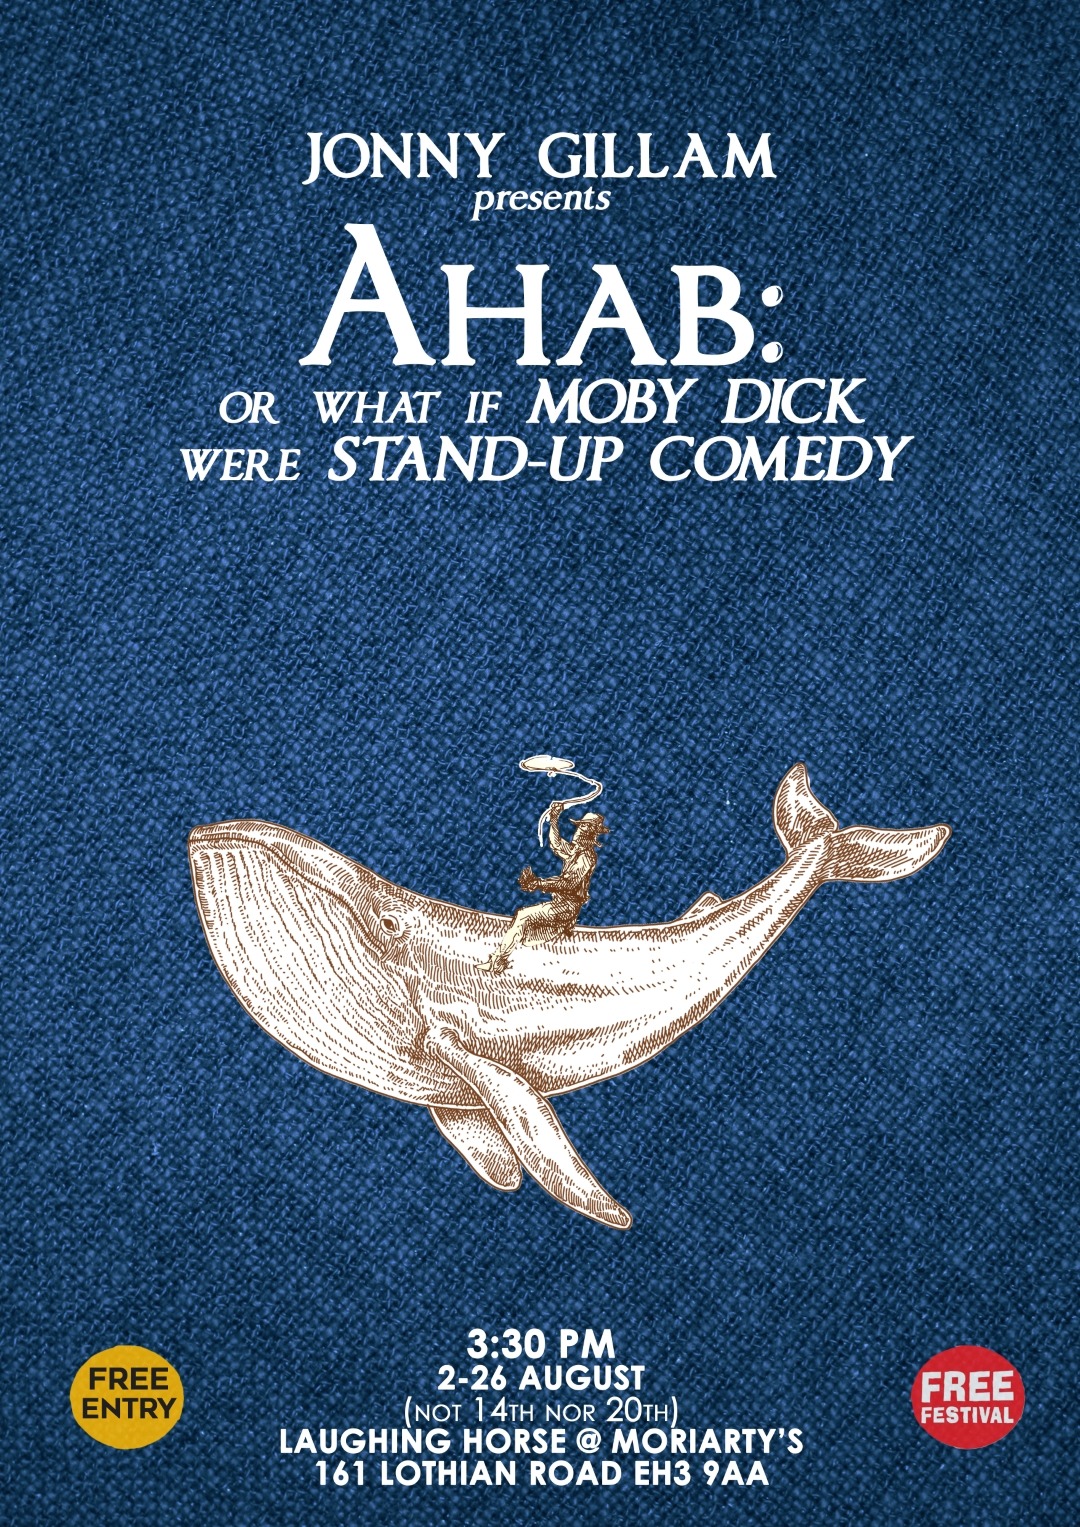 The poster for Ahab; or What If Moby Dick Were Stand-Up Comedy